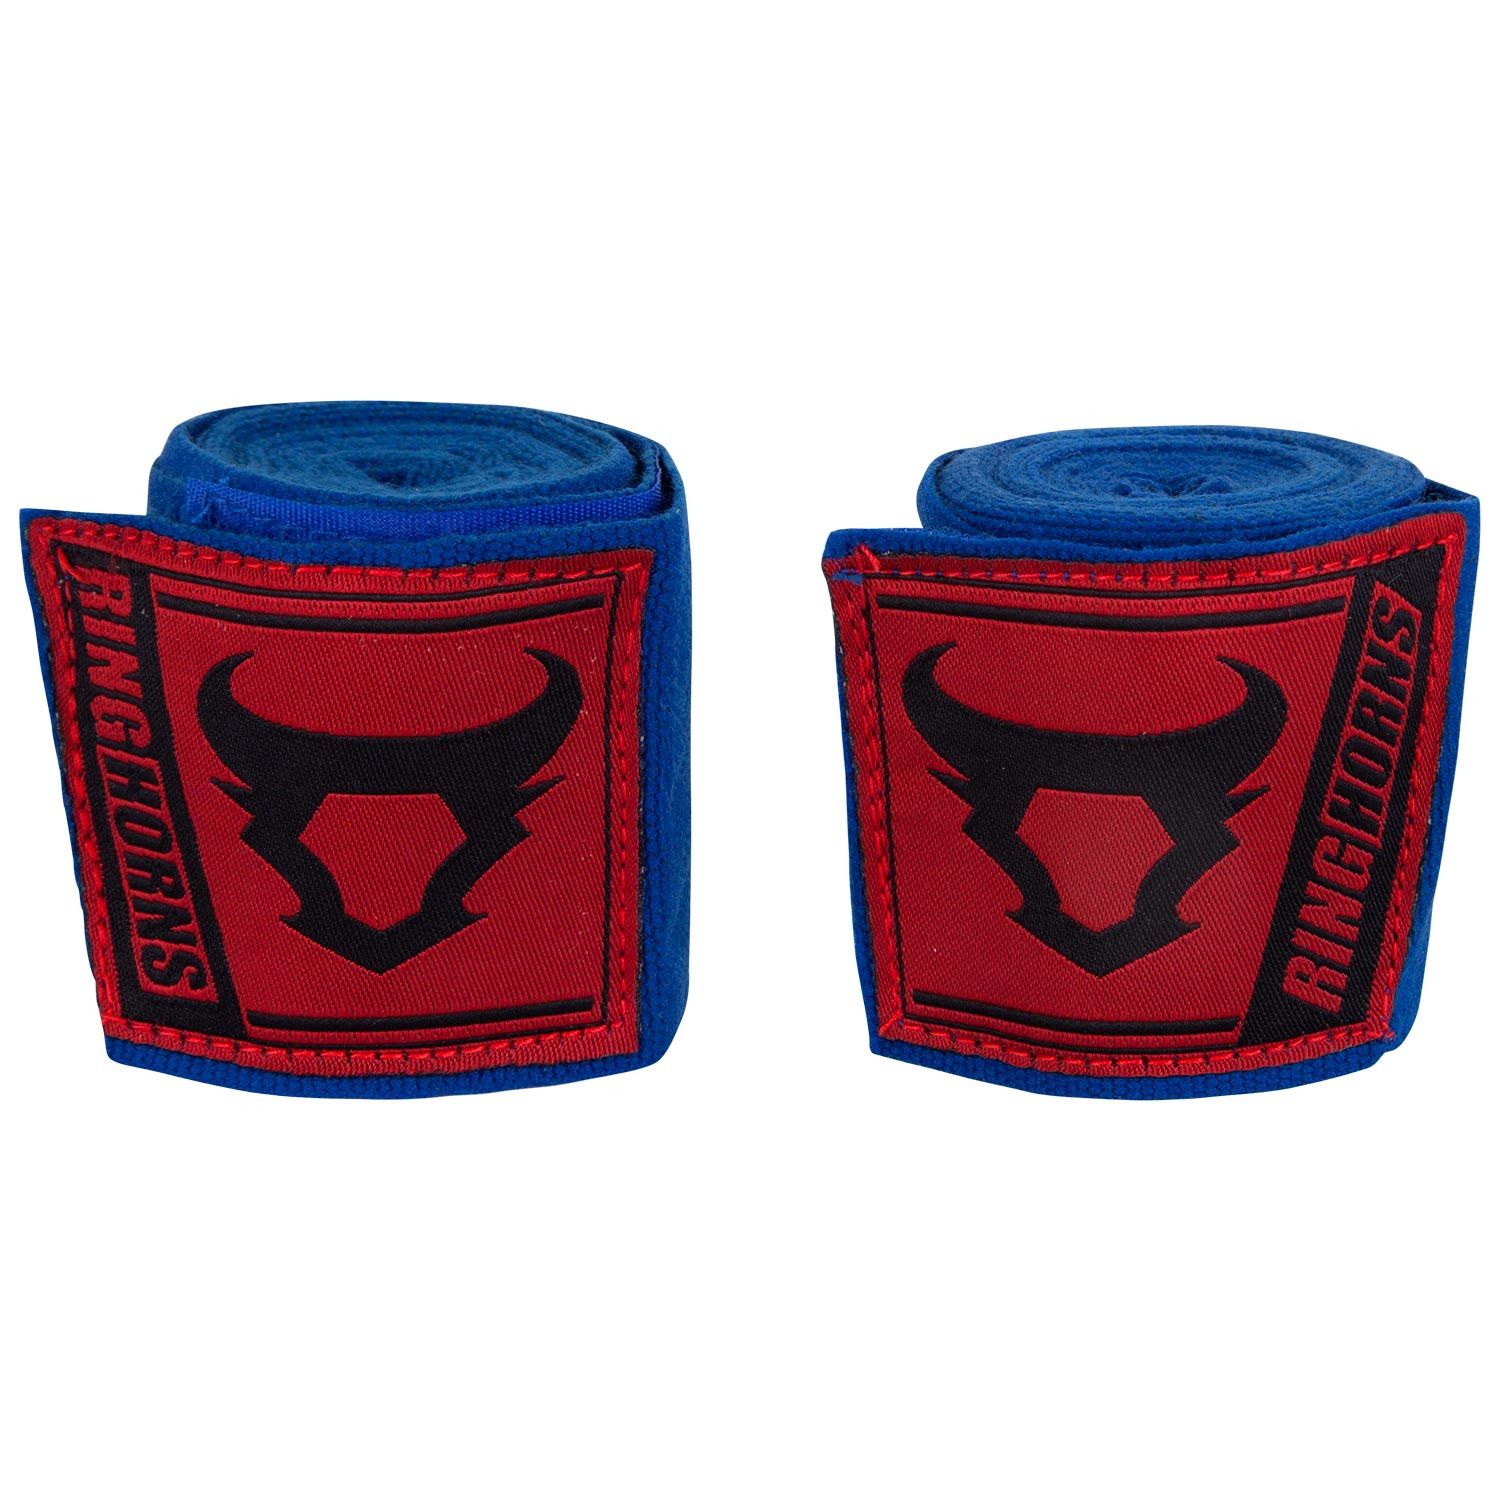 Blue Boxing Hand Wraps - Ringhorns